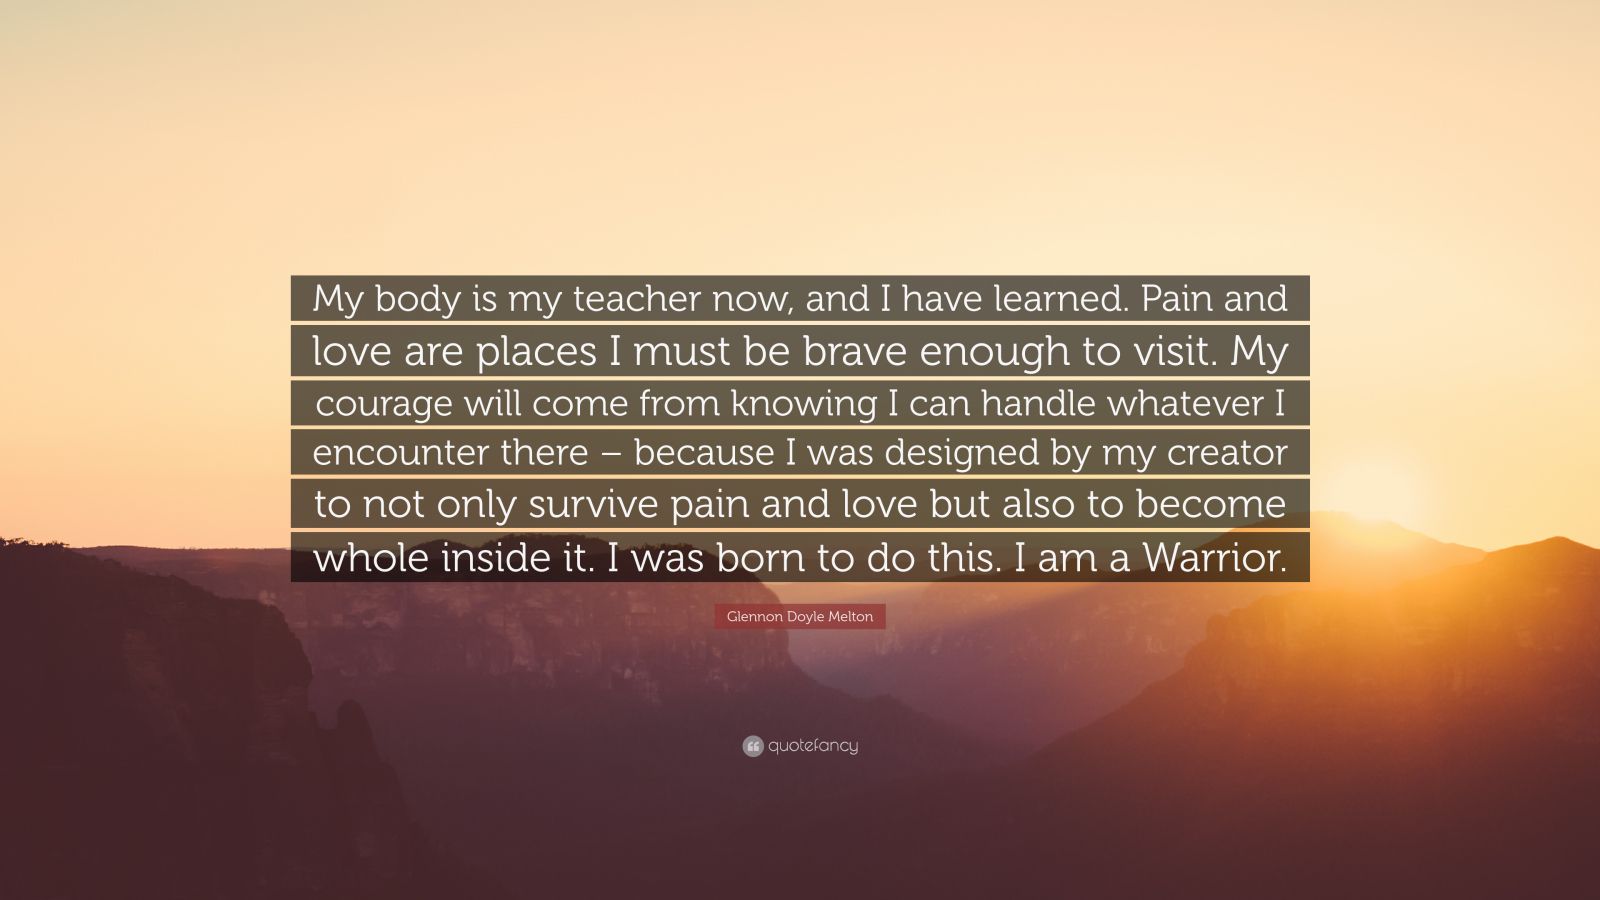 Glennon Doyle Melton Quote My Body Is My Teacher Now And I Have Learned Pain And Love Are Places I Must Be Brave Enough To Visit My Courage Will